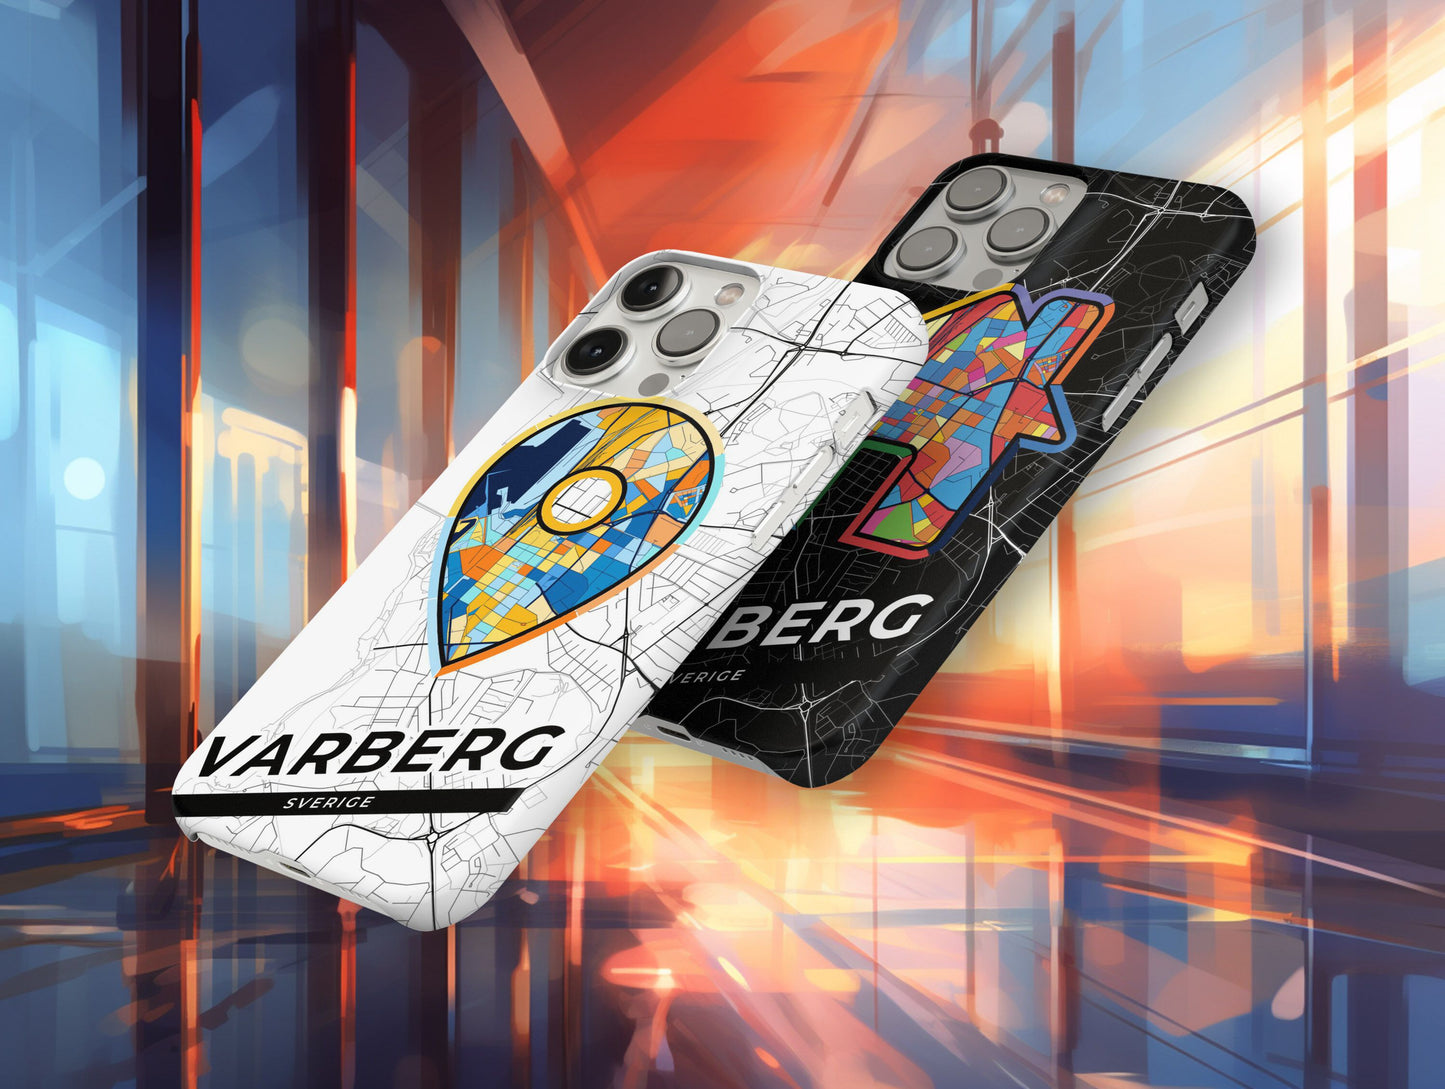 Varberg Sweden slim phone case with colorful icon